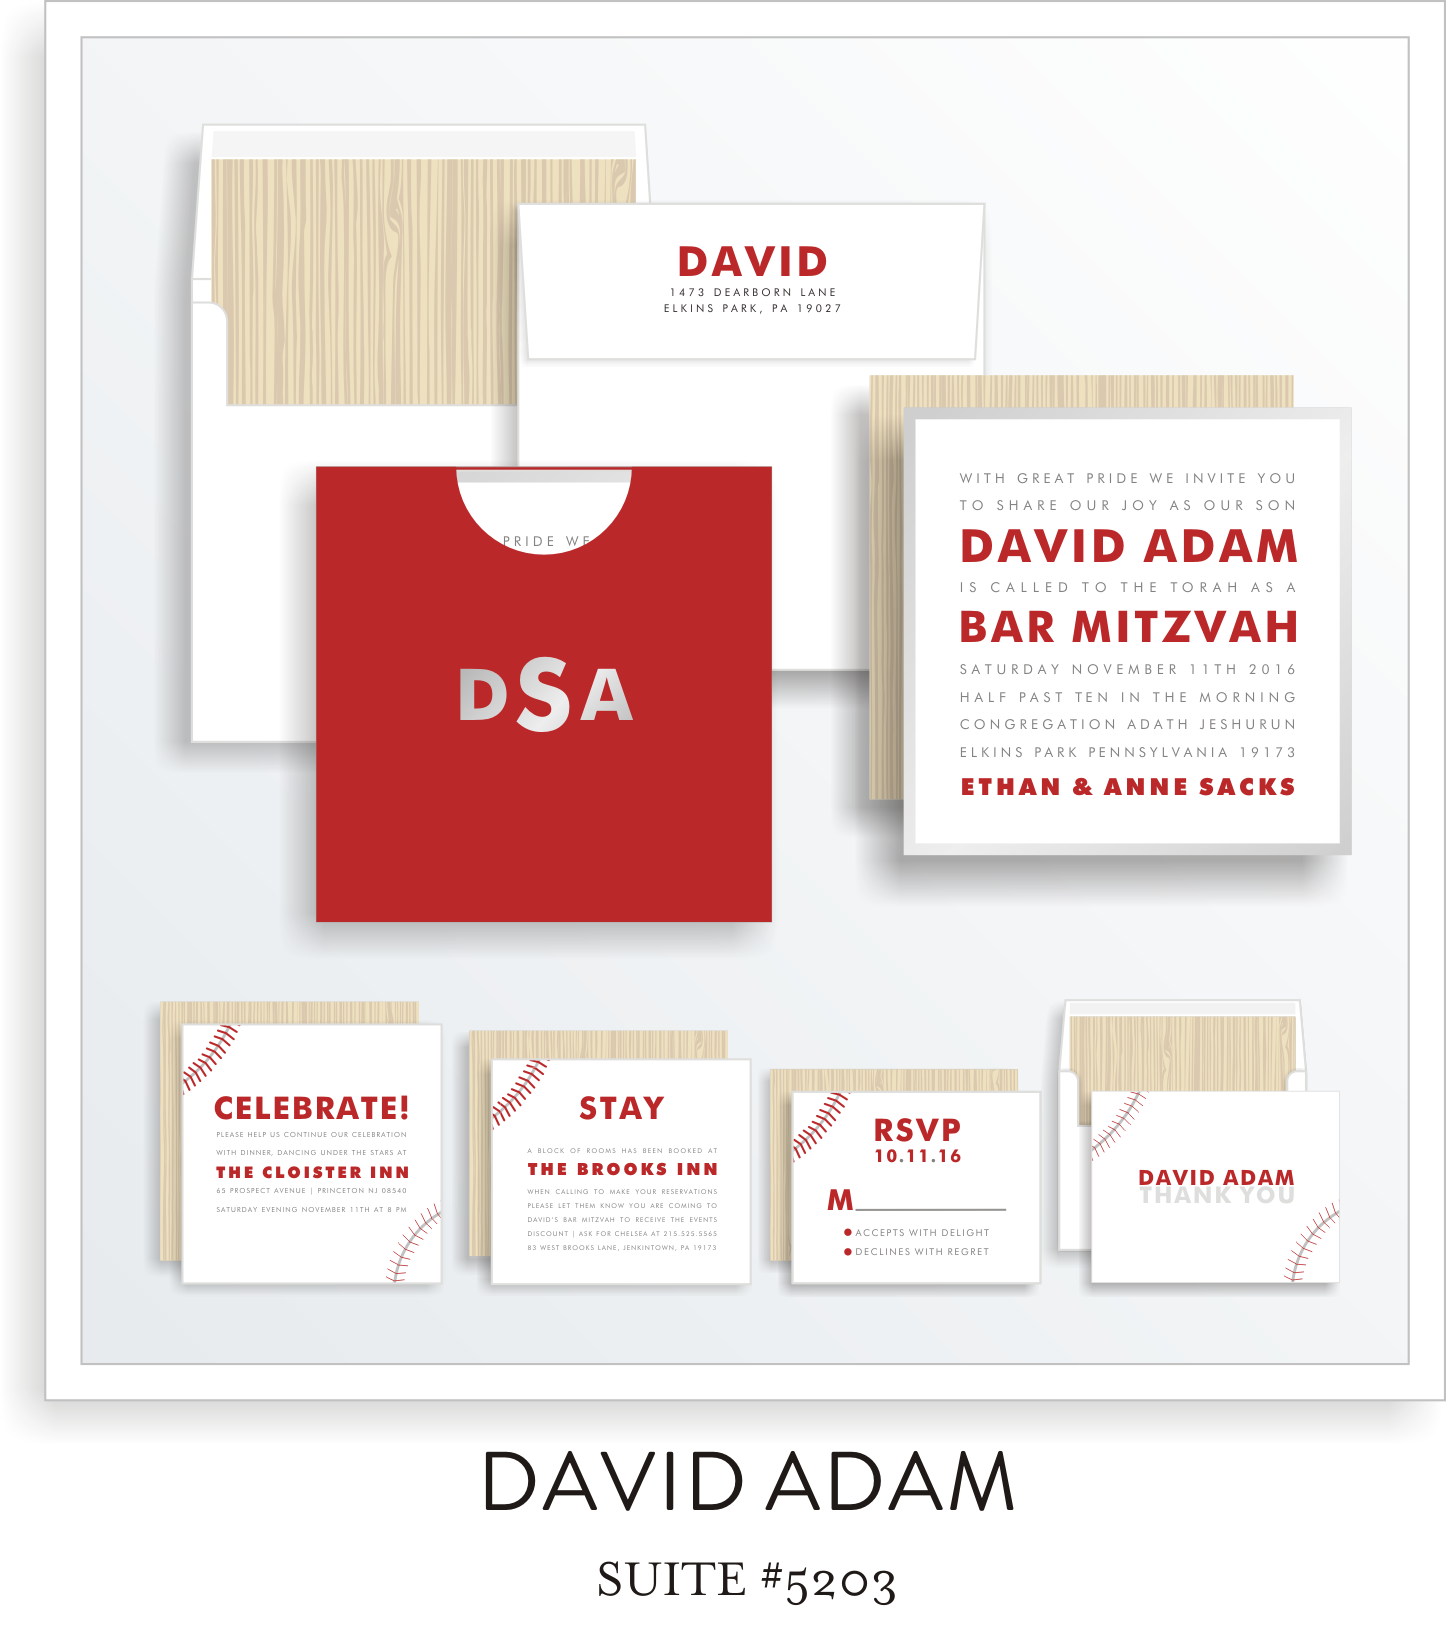 Copy of <a href=/bar-mitzvah-invitations-5203>Suite Details→</a><strong><a href=/david-adam-in-colors>see more colors→</a></strong> (Copy) (Copy) (Copy) (Copy) (Copy) (Copy) (Copy)